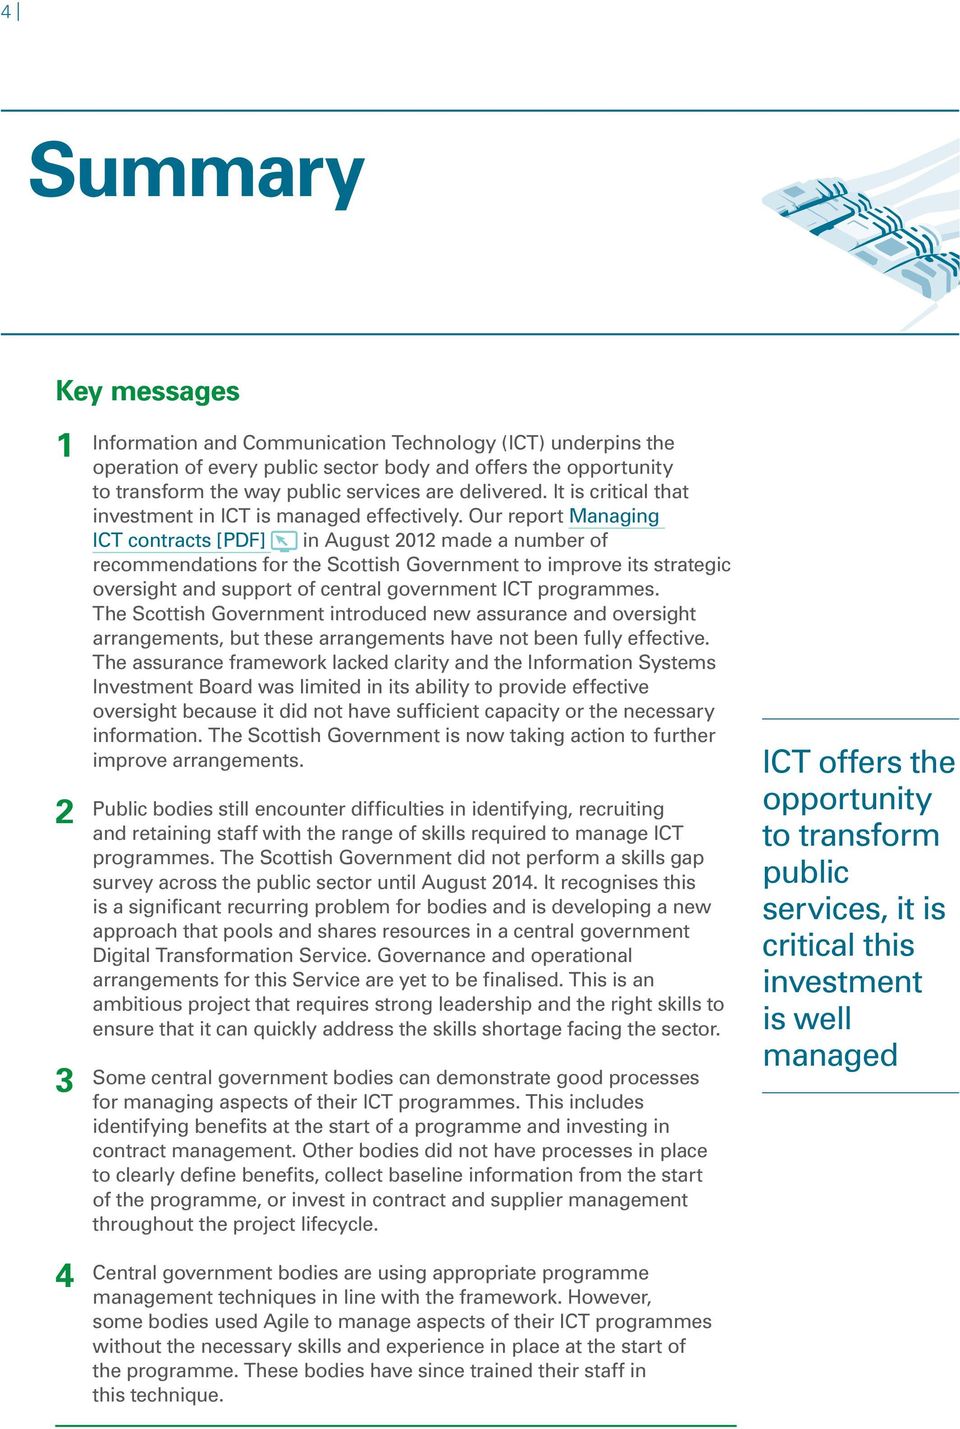 Our report Managing ICT contracts [PDF] in August 2012 made a number of recommendations for the Scottish Government to improve its strategic oversight and support of central government ICT programmes.